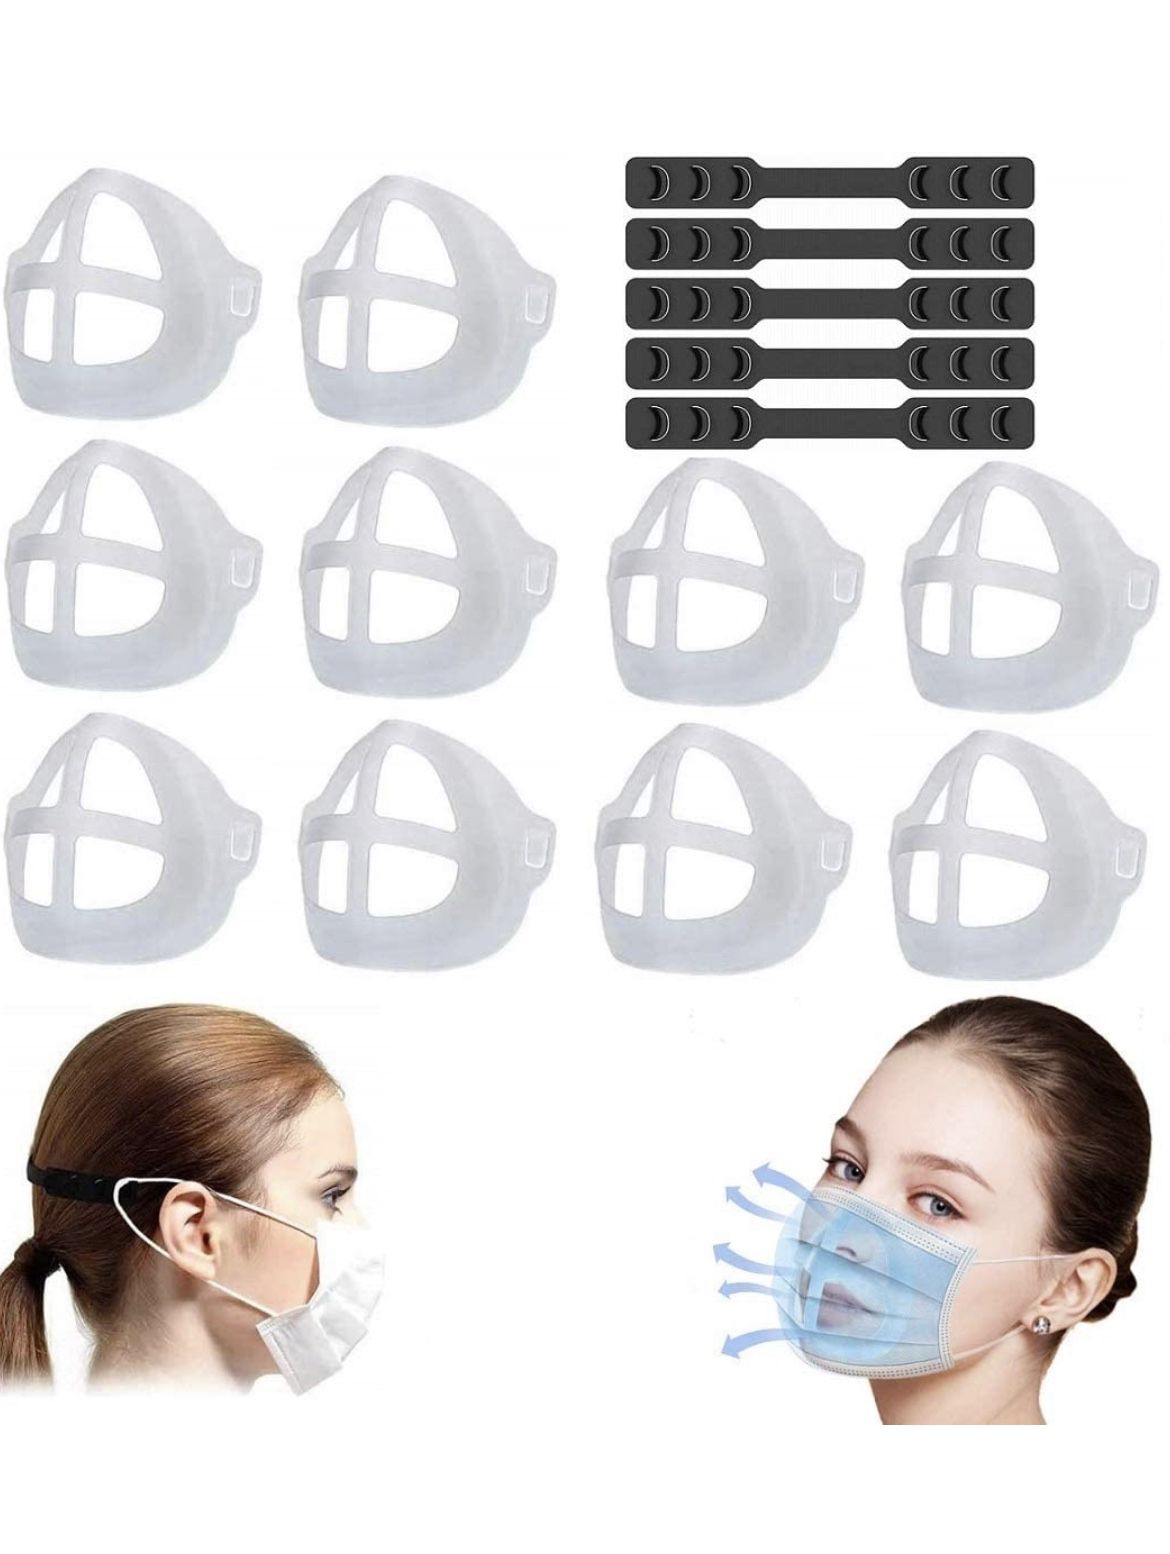 10 Pcs)3D Mask Bracket -  Protect Lipstick Lips - Internal Support Holder Frame Nose Breathing smoothly - DIY Face Mask Accessories, Plus 5x Mask E